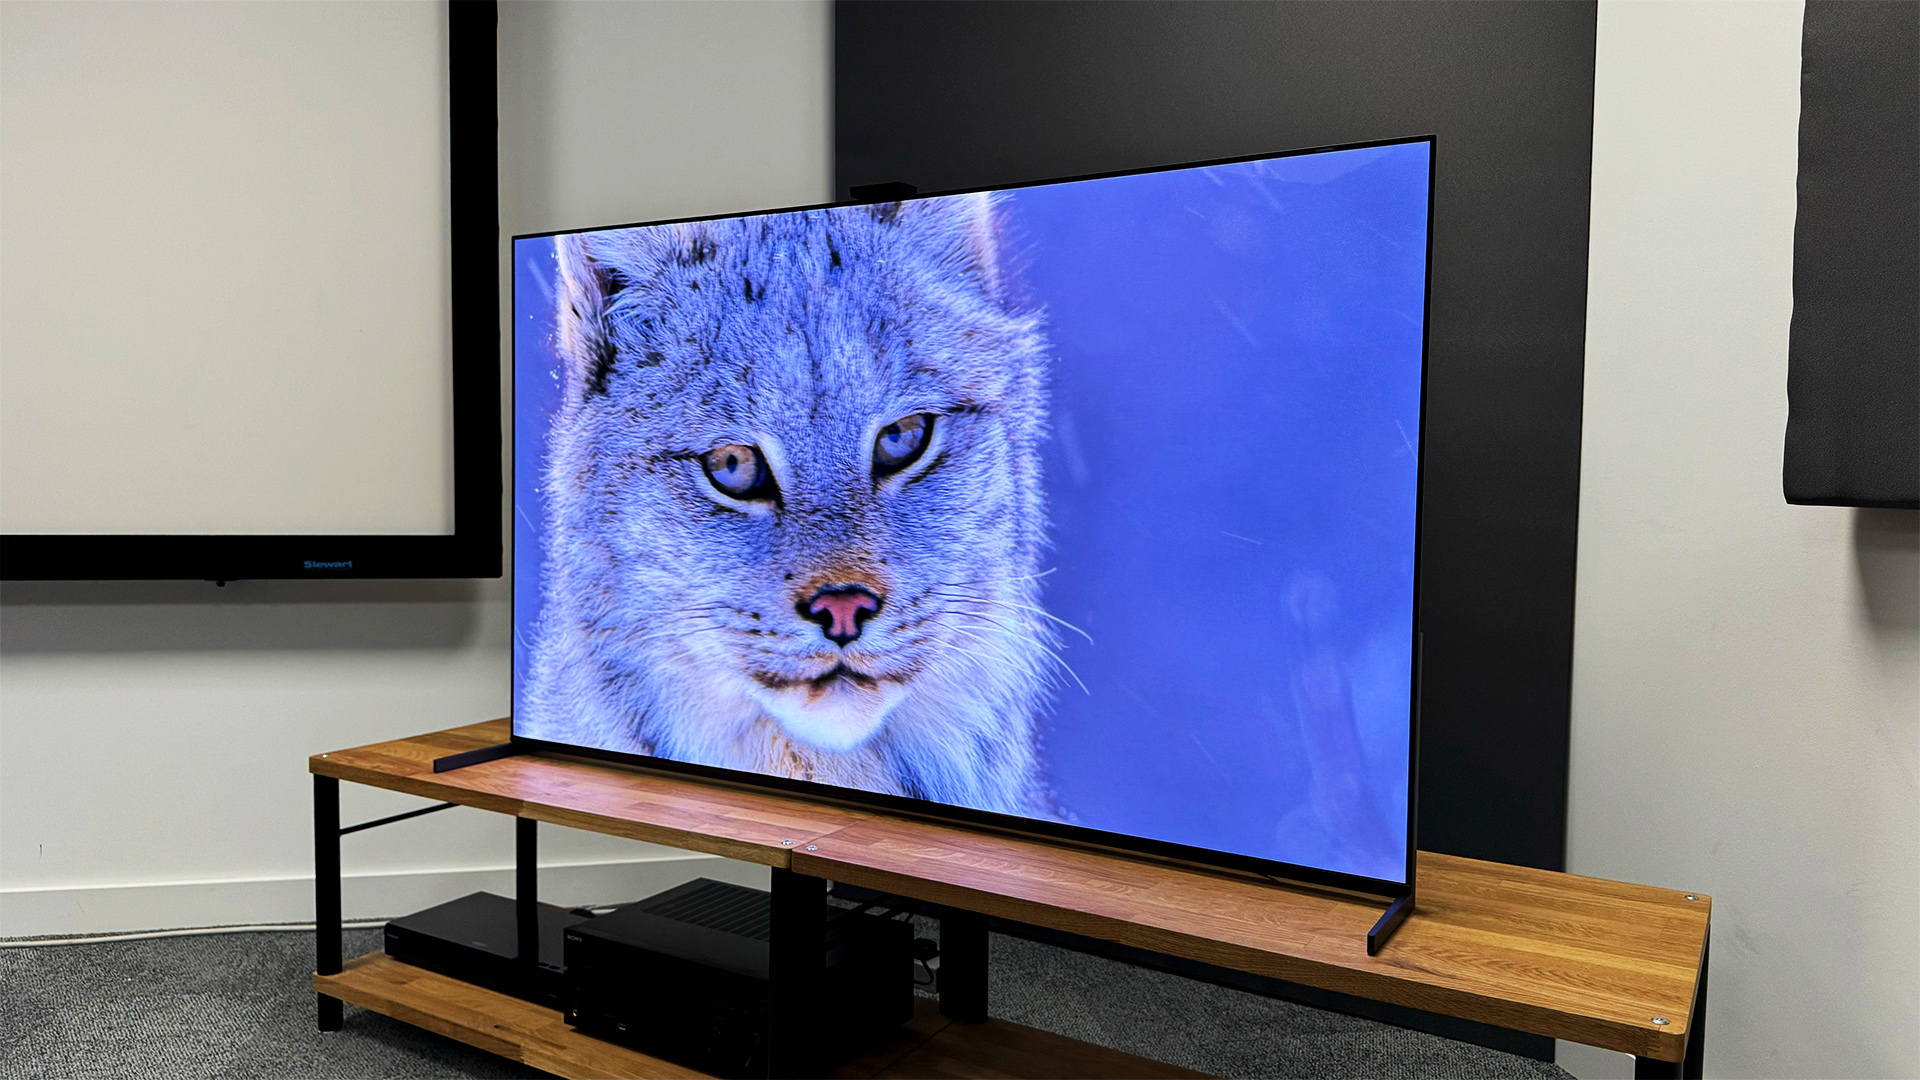 65-inch LED TV ensure larger than life viewing: Choose from top 8